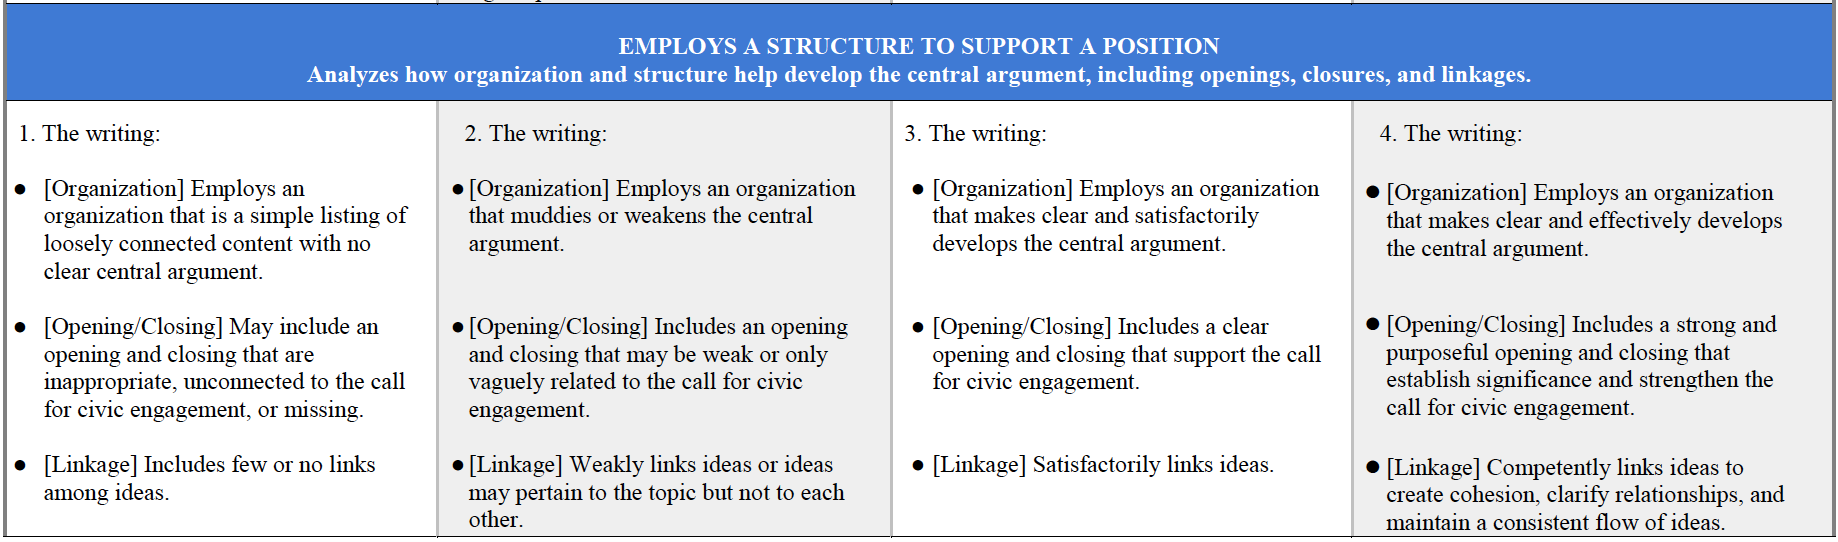 Employs a Structure Snapshot